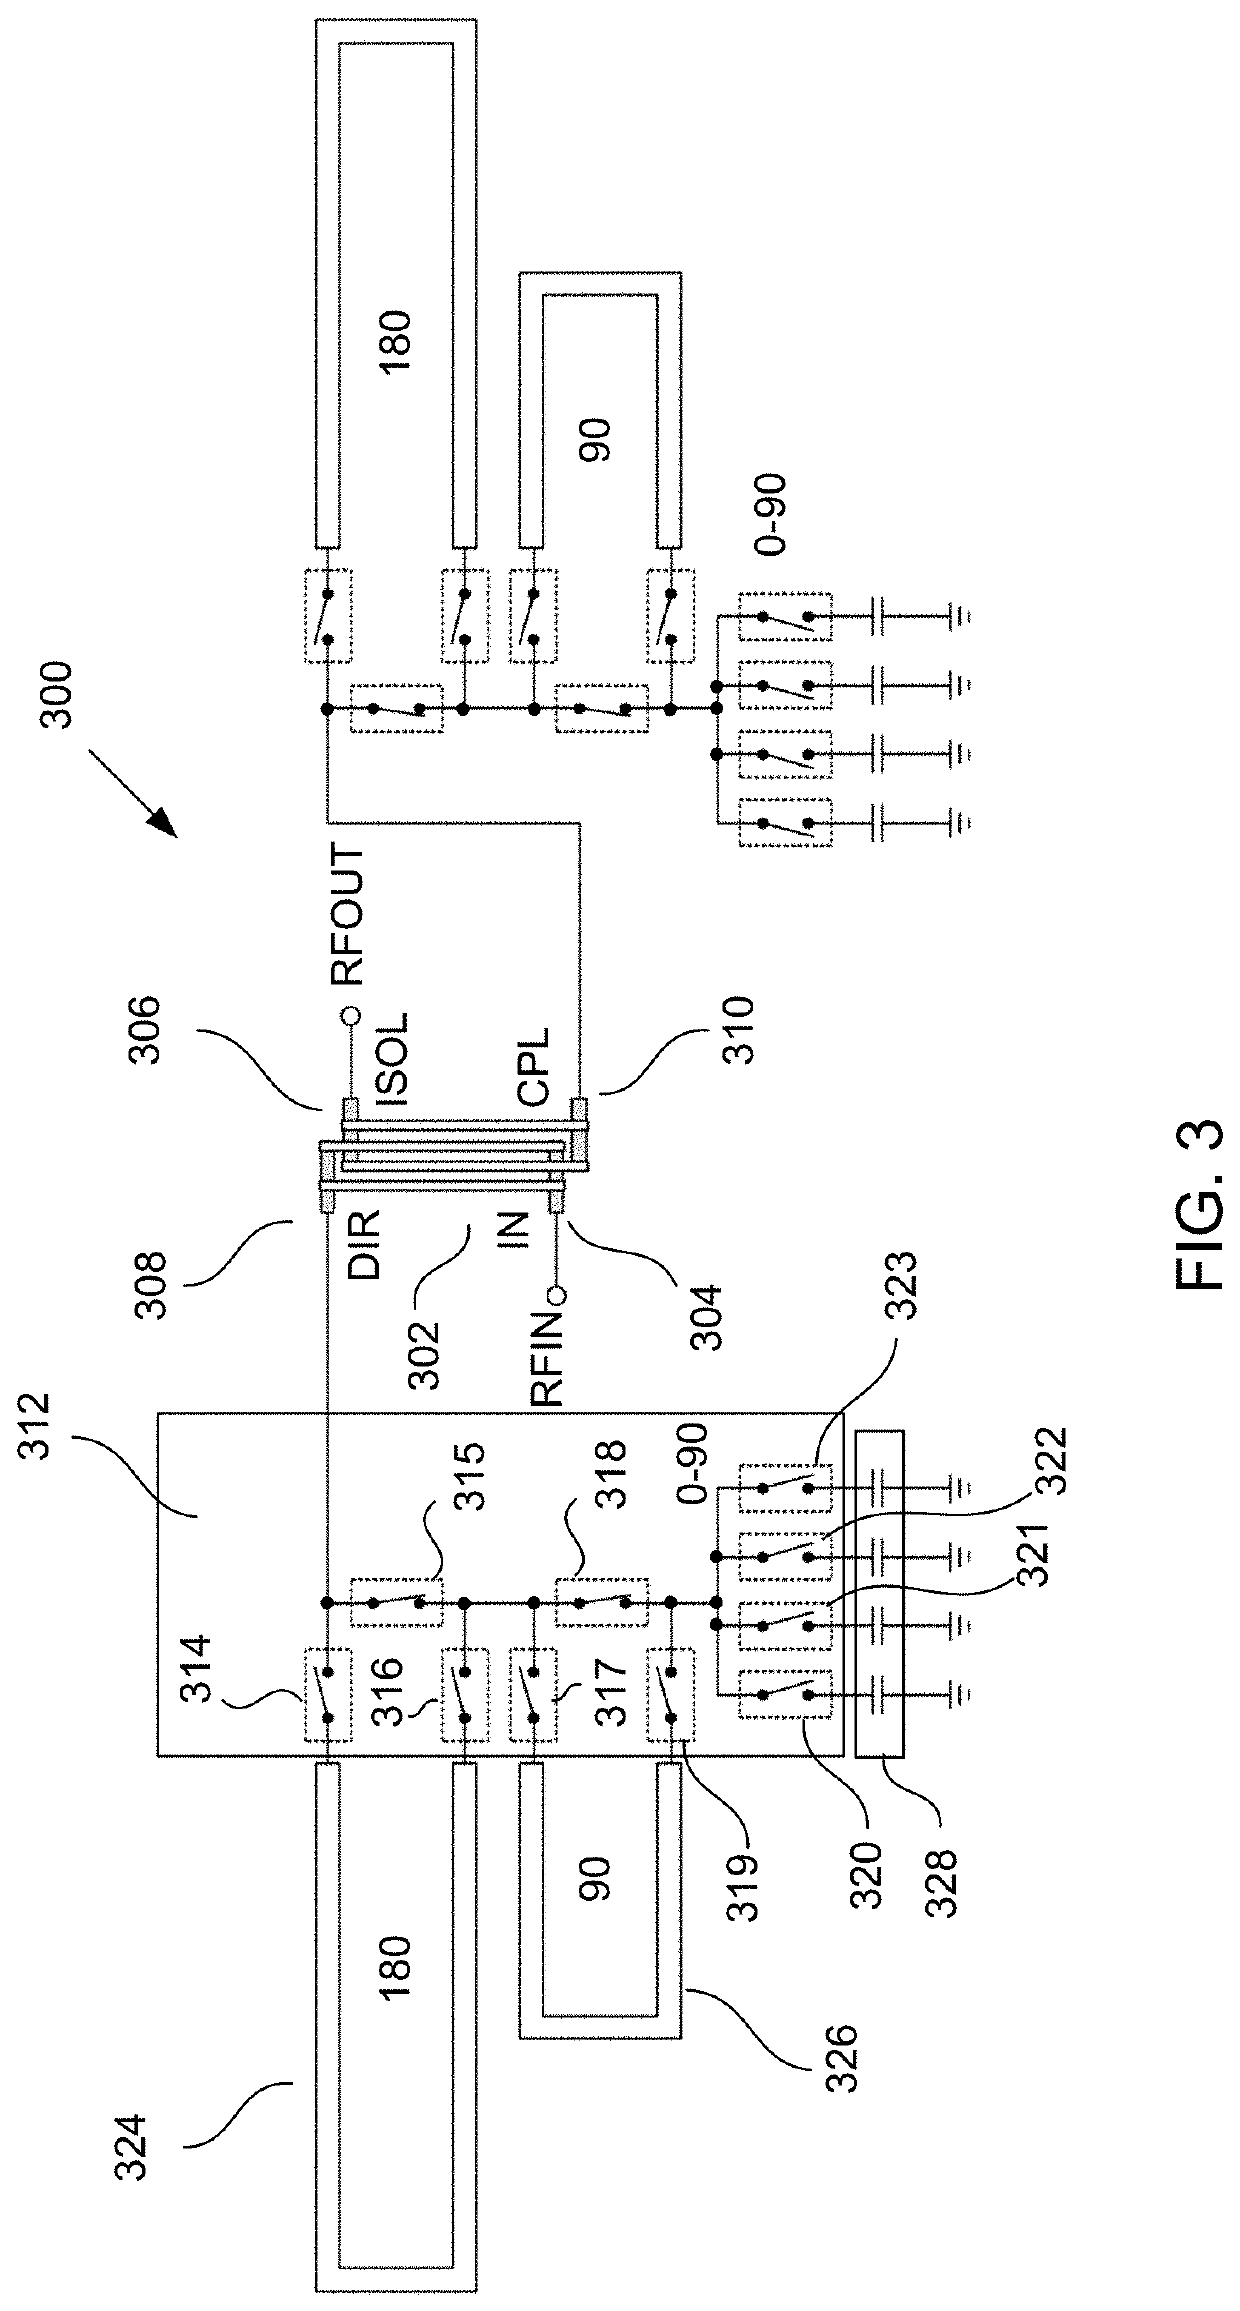 Low Loss Reflective Passive Phase Shifter using Time Delay Element with Double Resolution